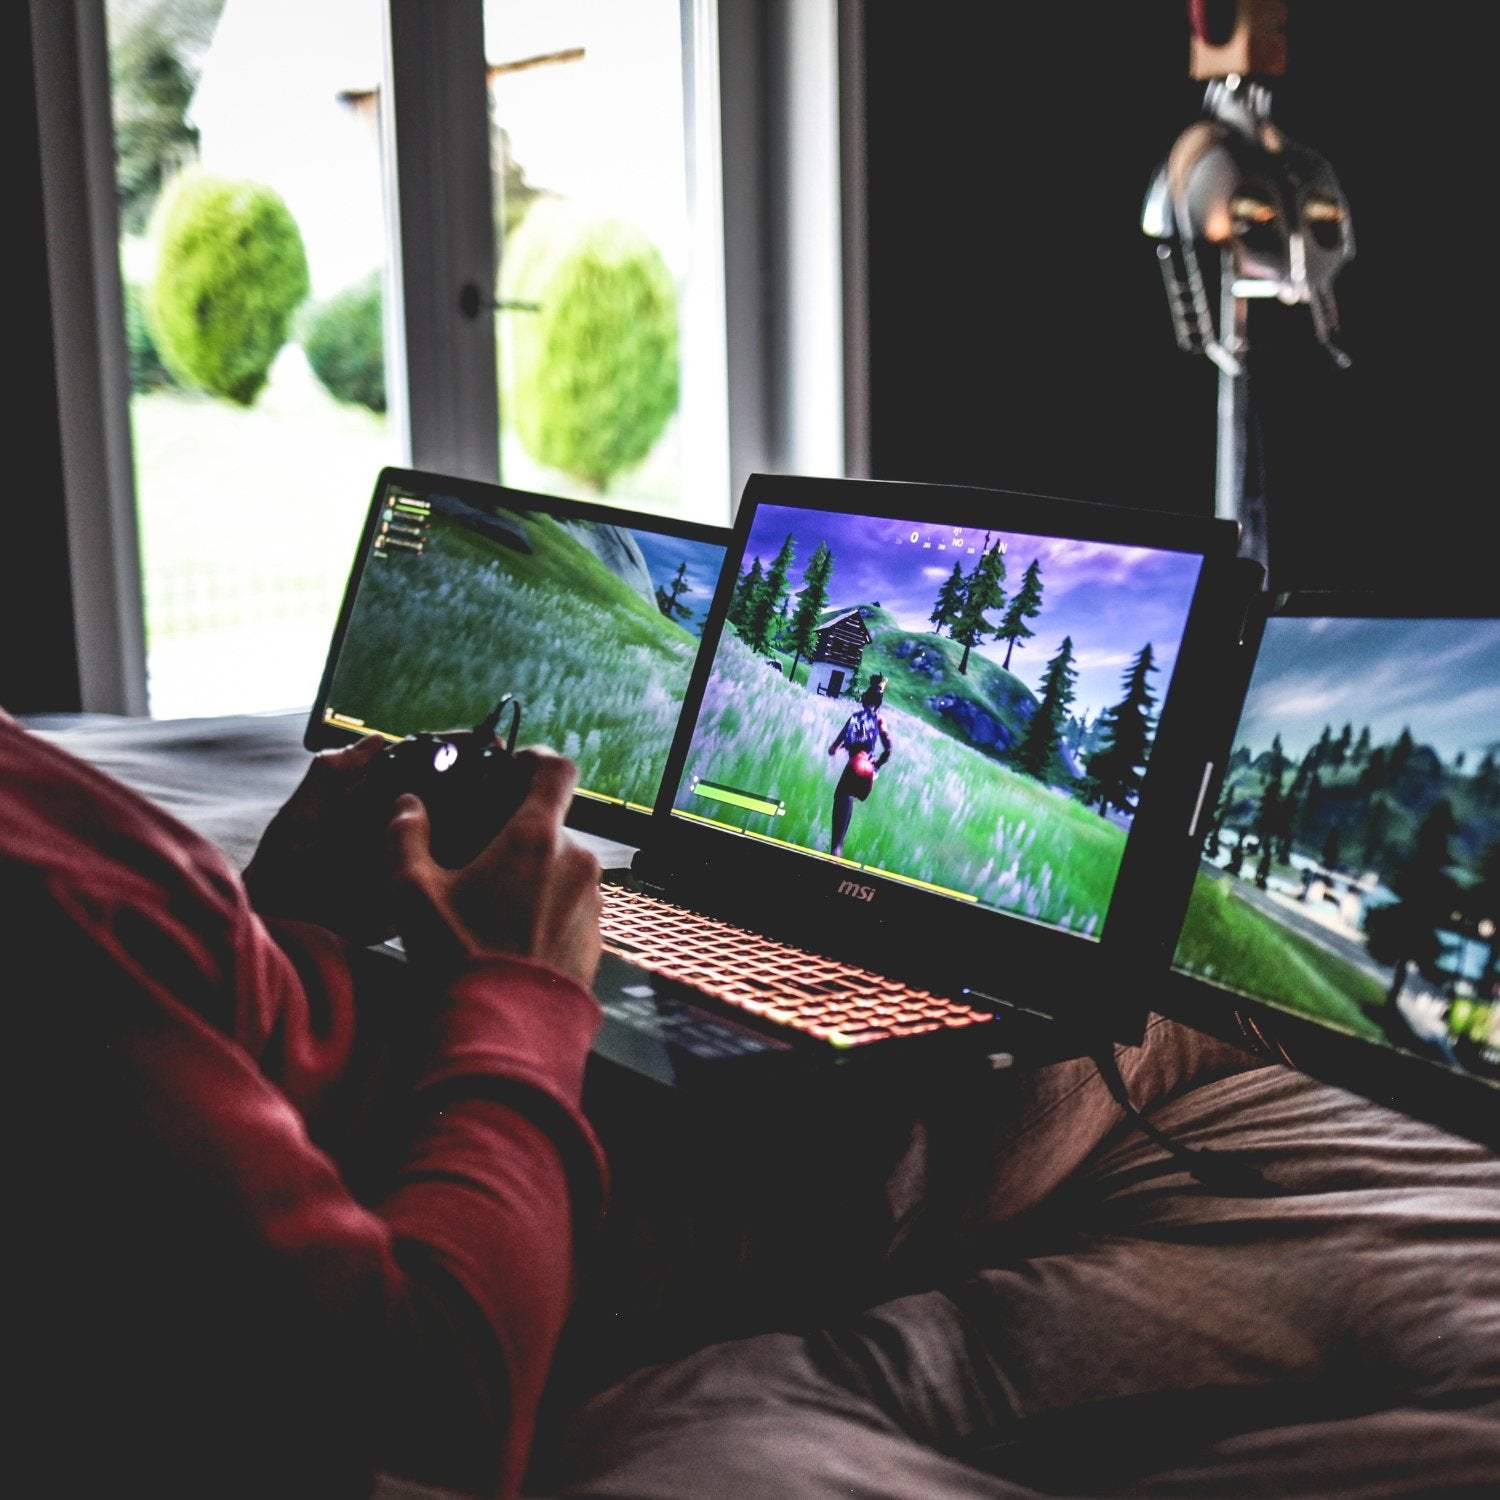 Advantages of Gaming with 3 screens - The Portable Monitor